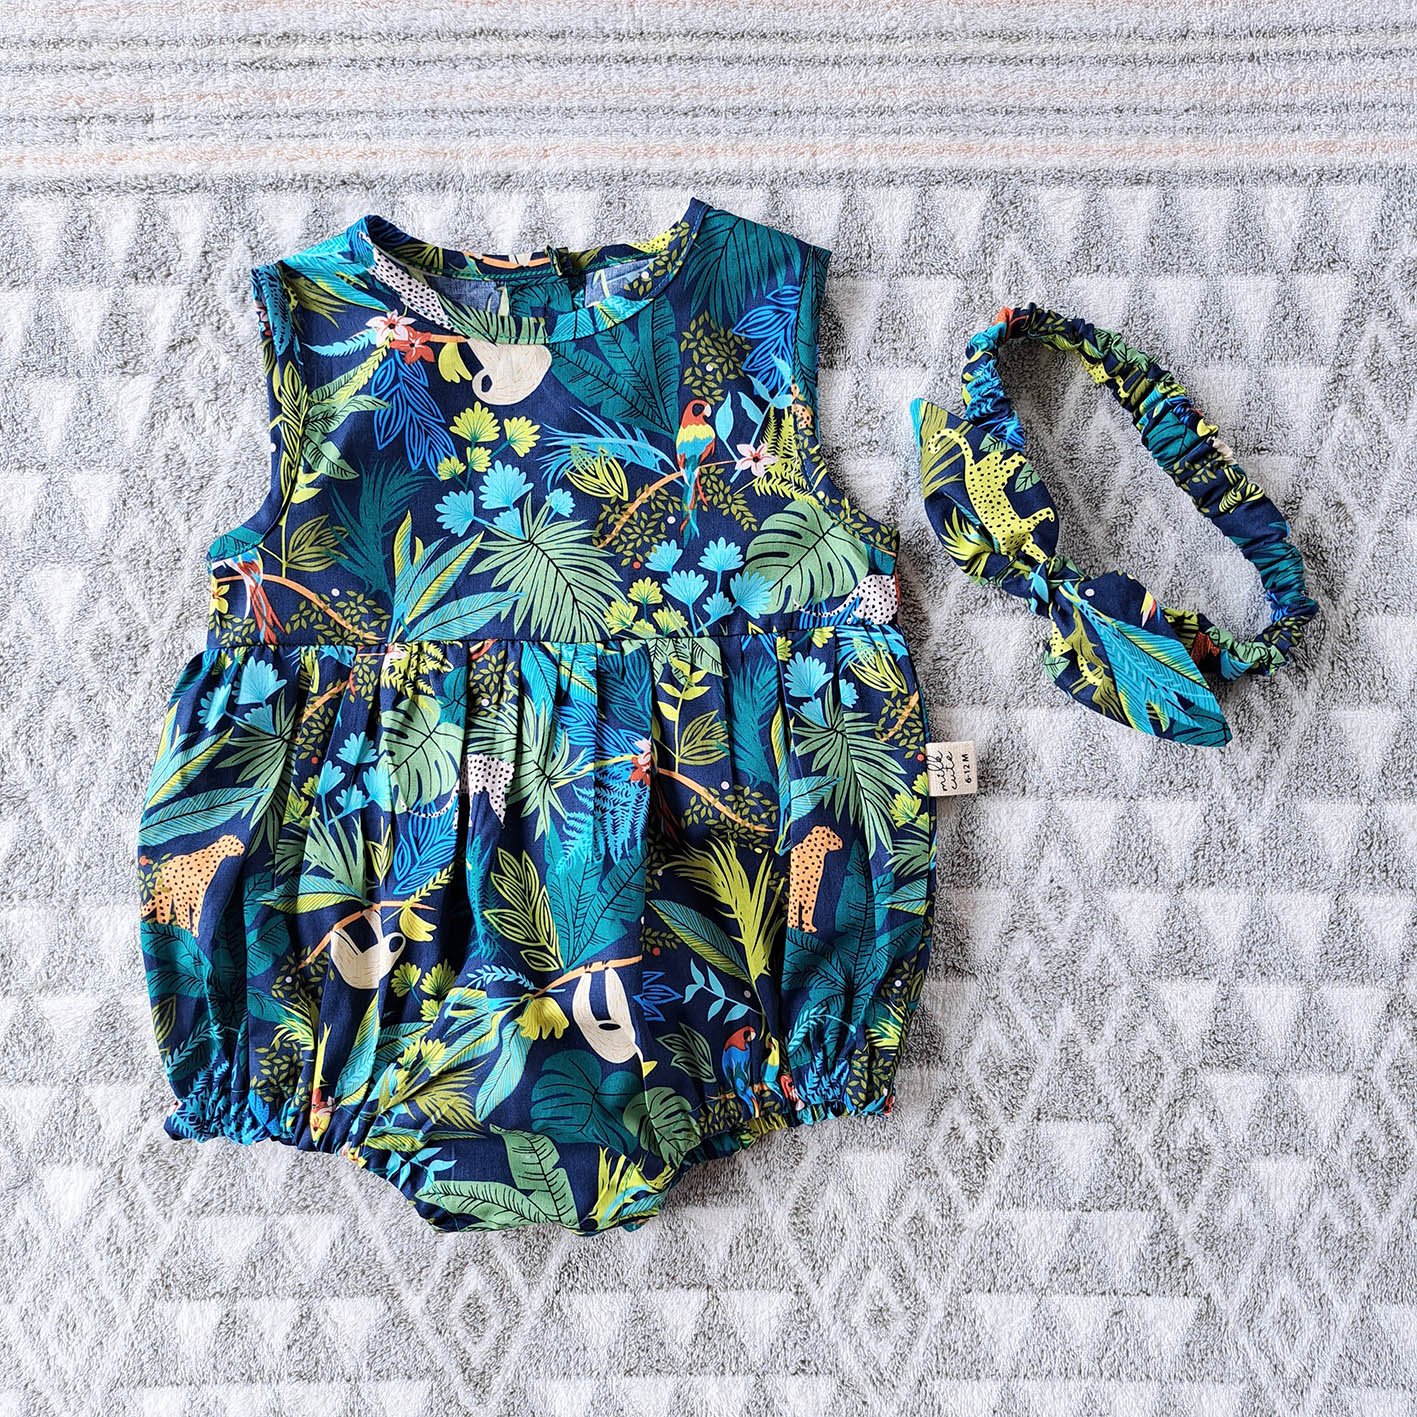 BUTTONS BACK DARK BLUE JUNGLE ROMPER 100% PRINTED COTTON*HEADBAND NOT INCLUDED